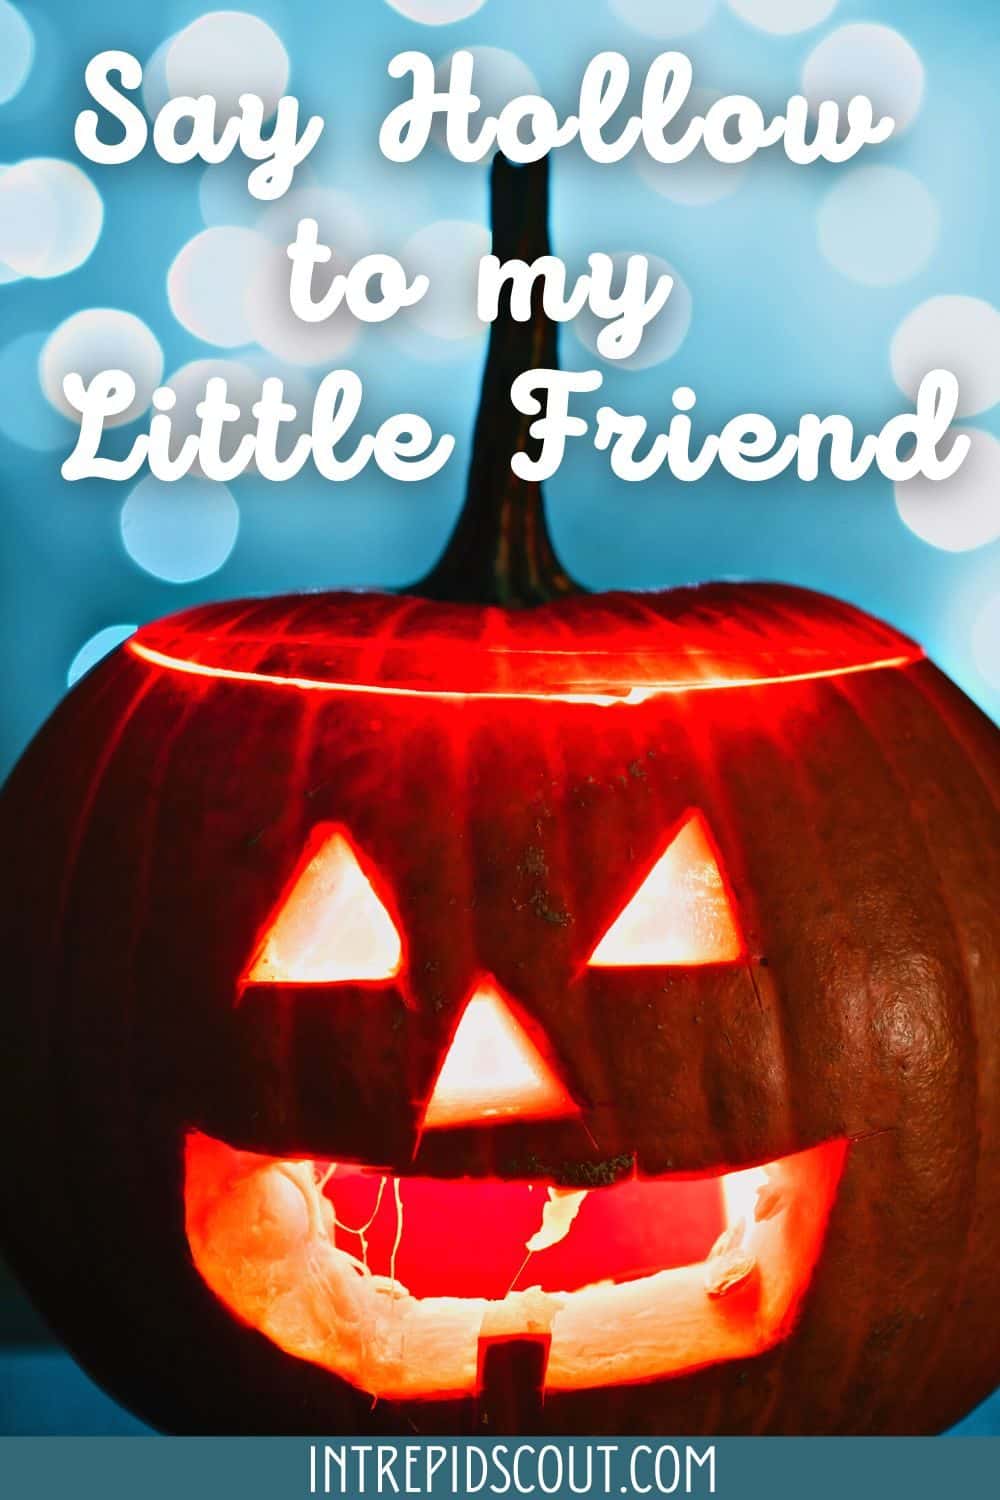 Jack-o'-lantern Captions and Quotes